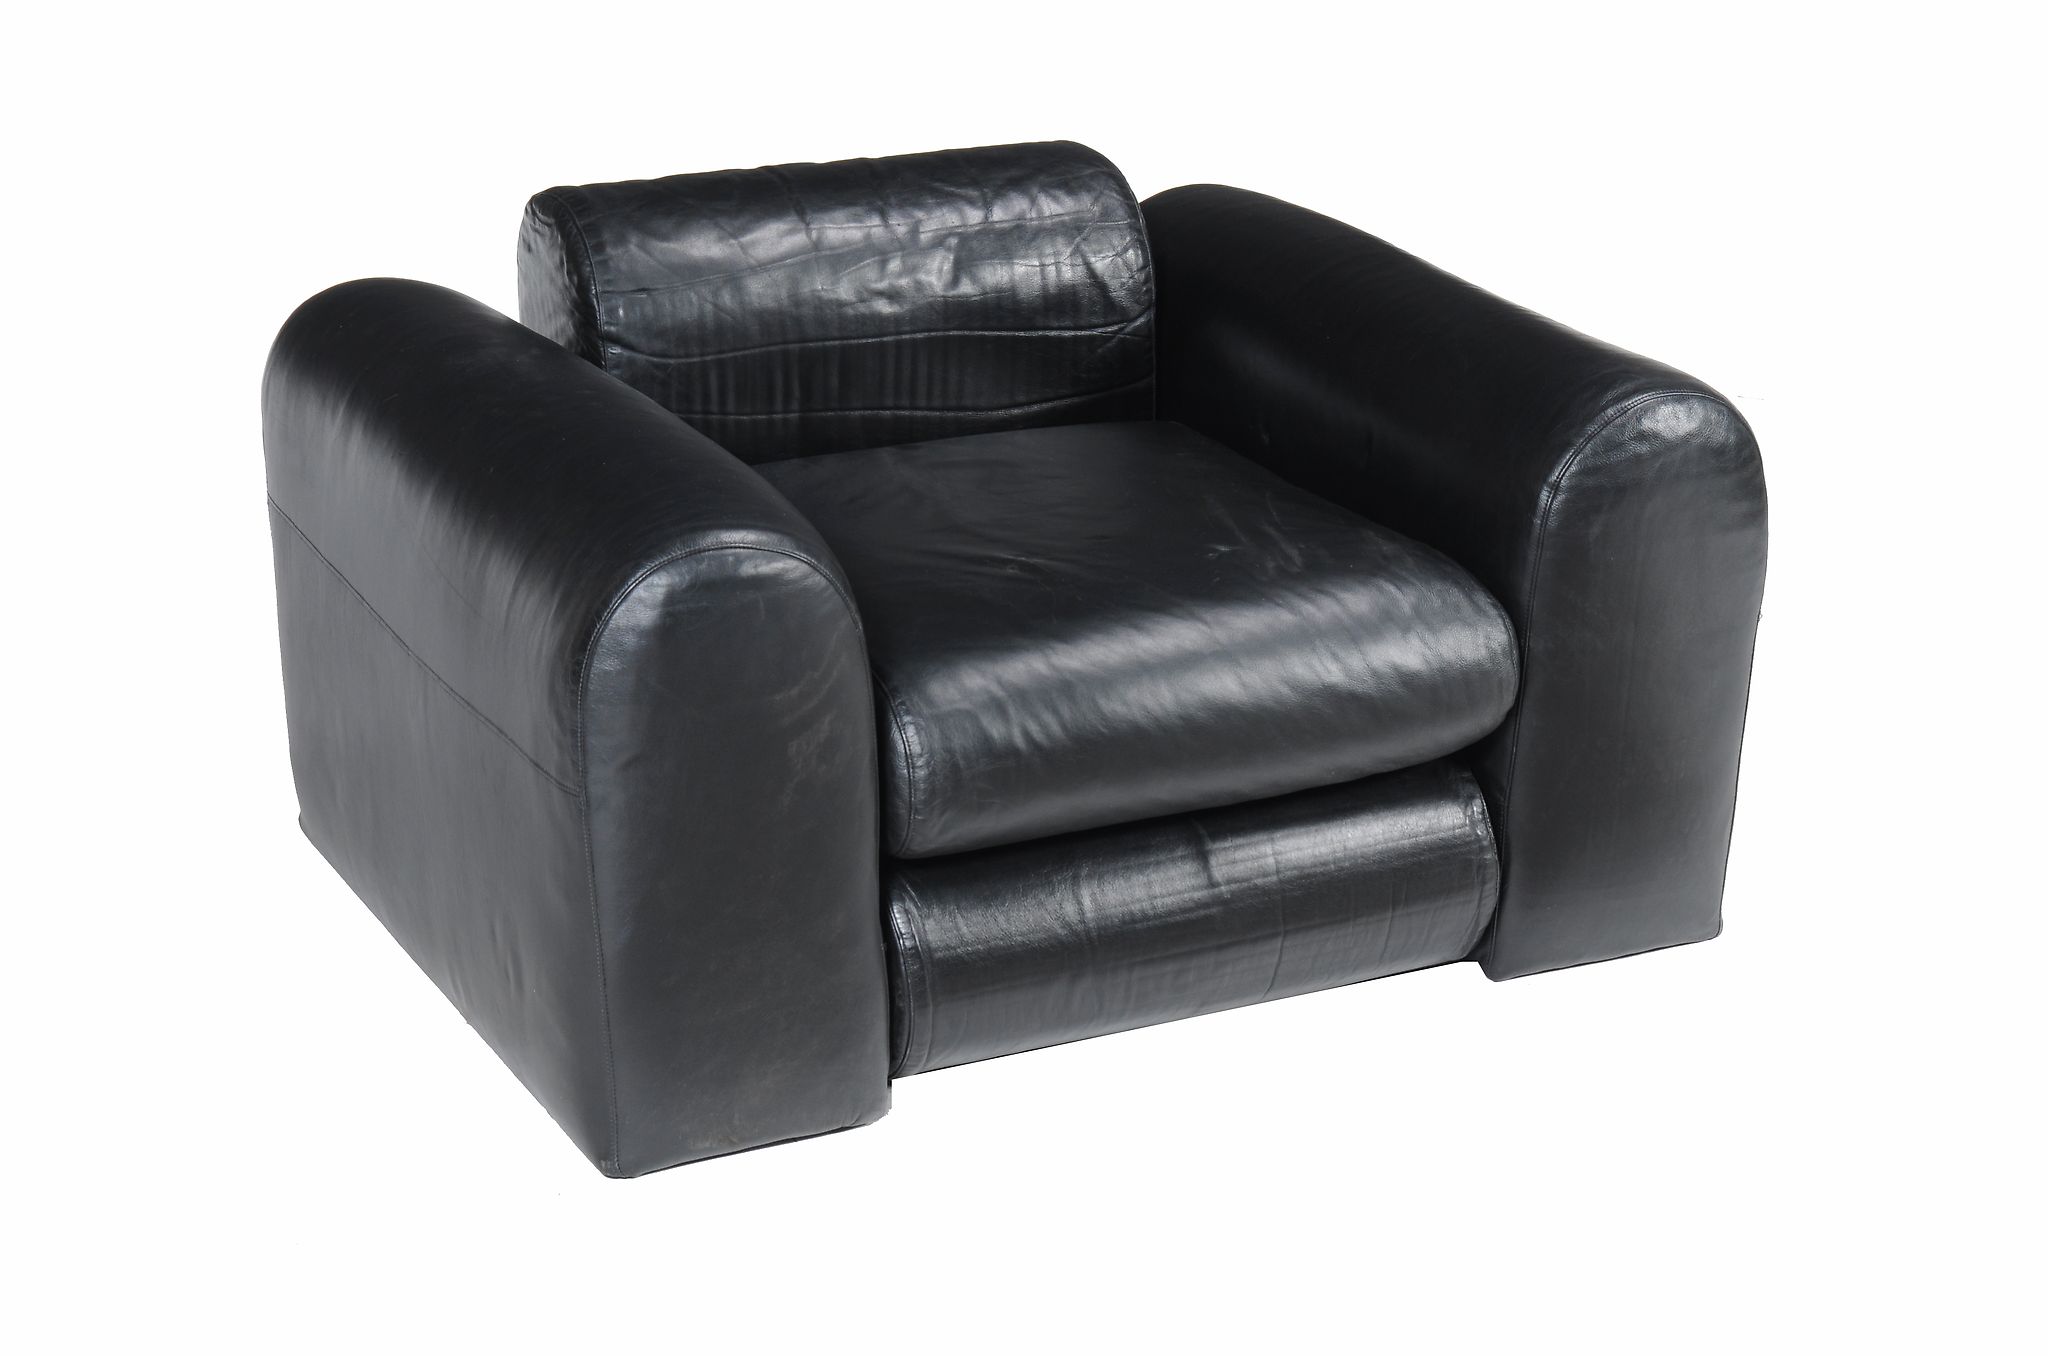 A vintage black leather upholstered lounge armchair, 1960s, attributed to Apple Designs, 64cm high - Image 2 of 2